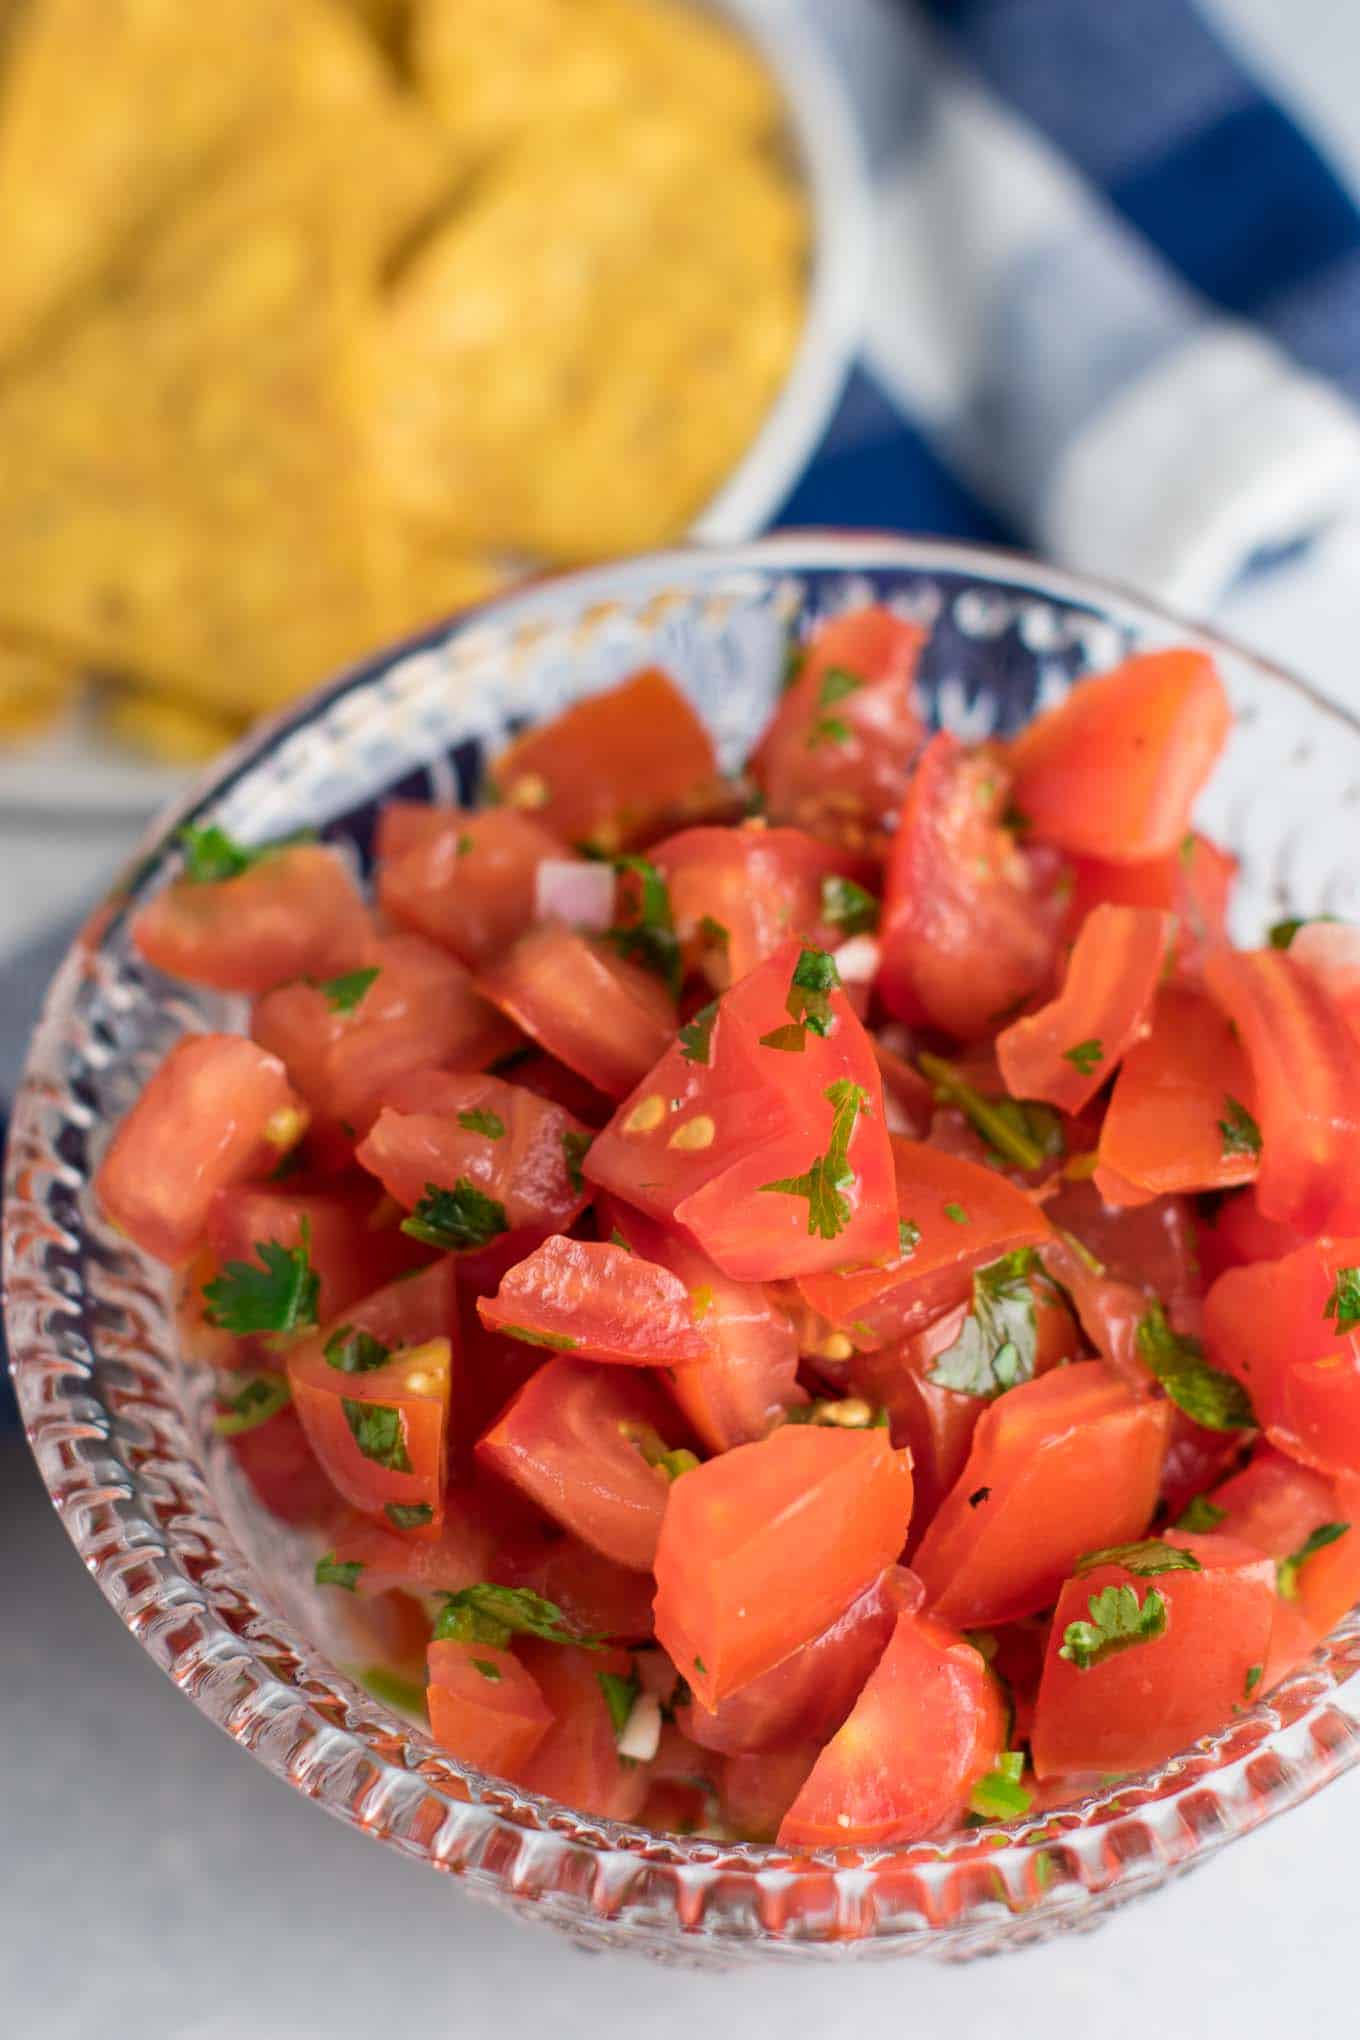 Easy Homemade Fresh Salsa recipe – take mexican night to the next level or serve alone with chips, either way you’ll love it! #vegan #homemadesalsa #picodegallo